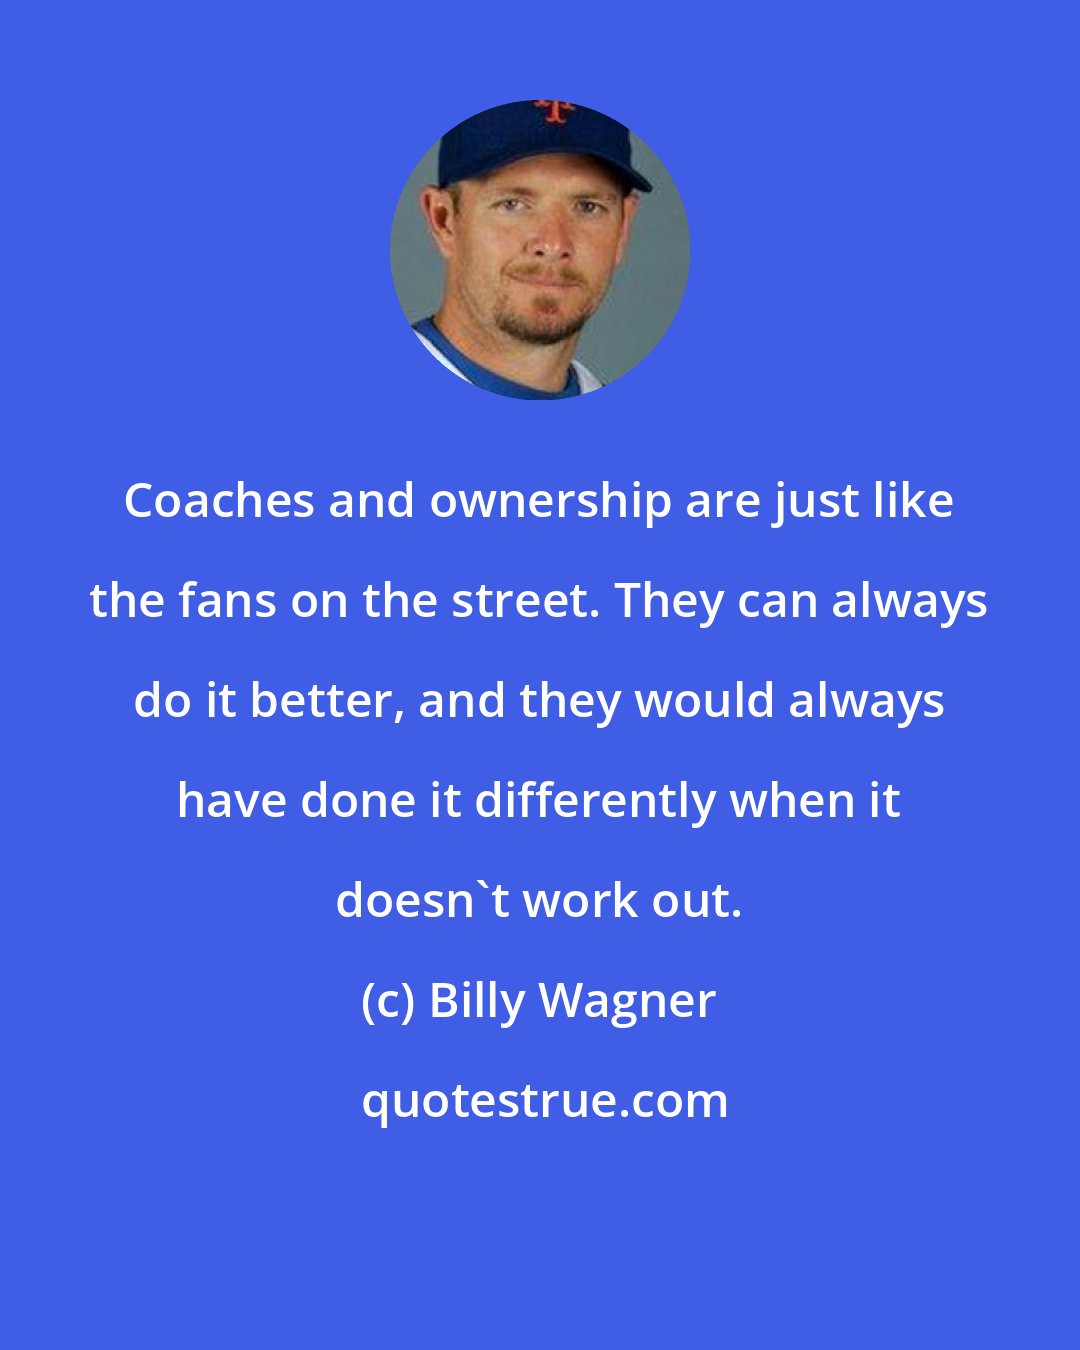 Billy Wagner: Coaches and ownership are just like the fans on the street. They can always do it better, and they would always have done it differently when it doesn't work out.